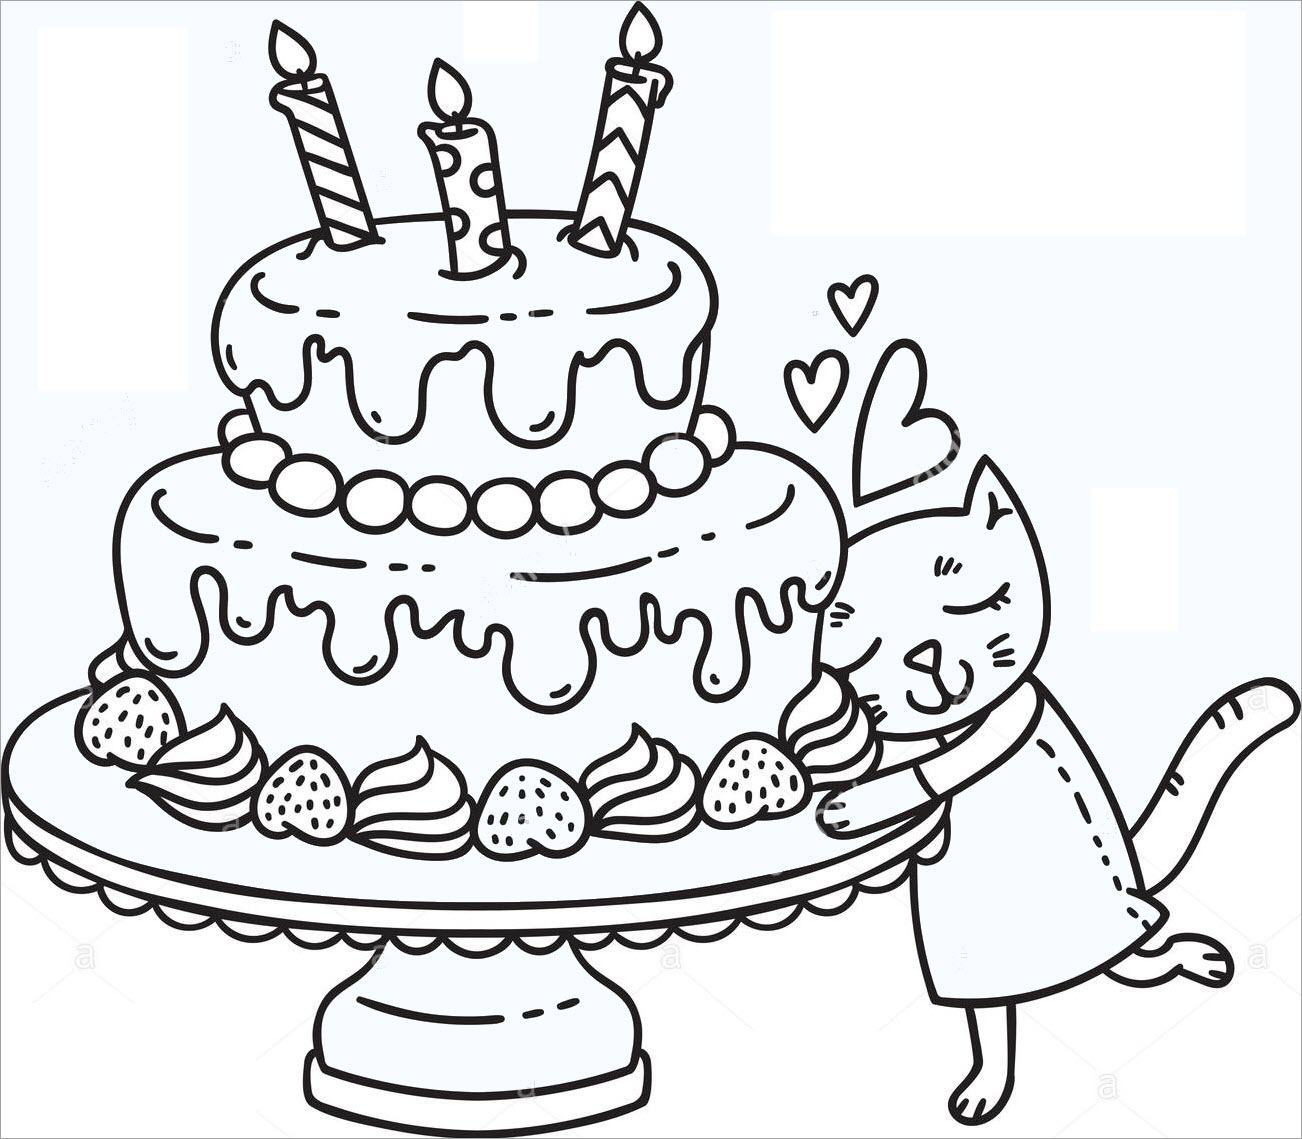 Birthday cake for kids to color